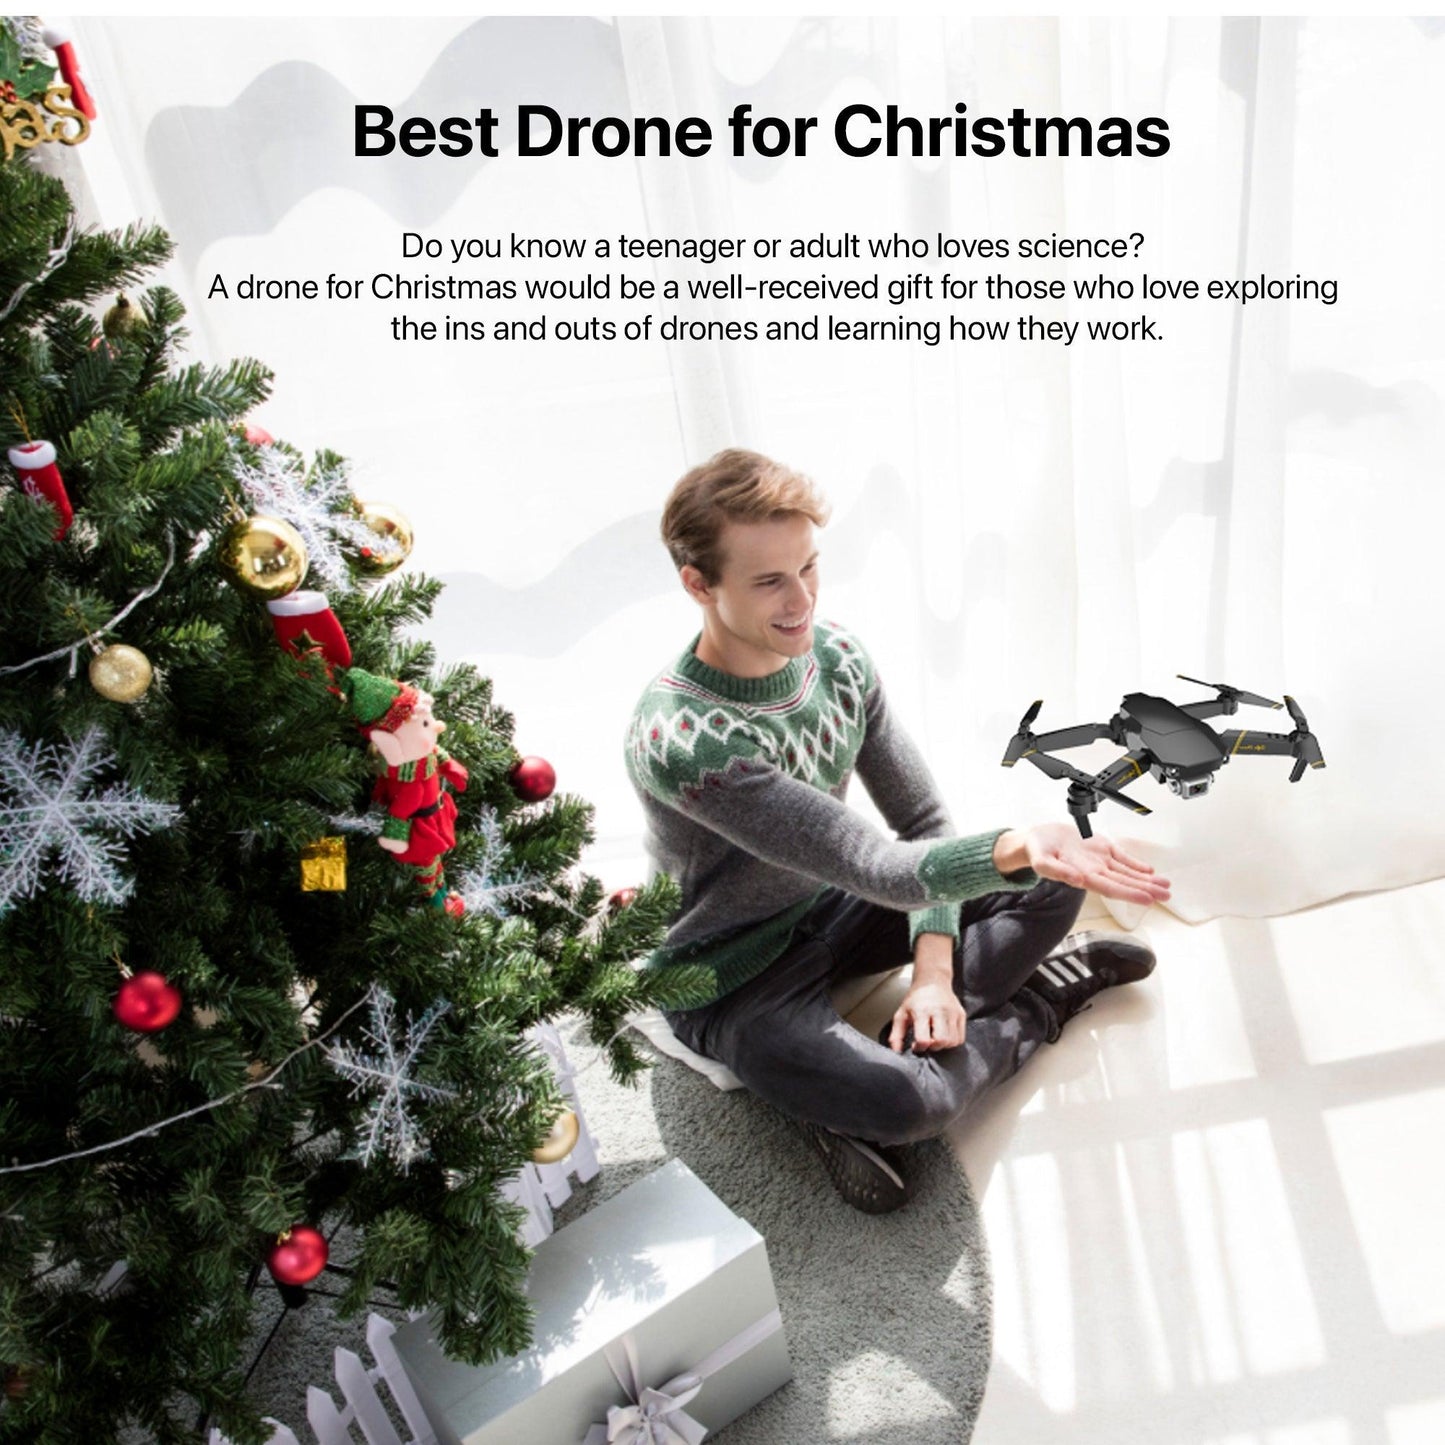 Refurbished: The Bigly Brothers E58 X Pro Lite: 2k HD Drone Camera Edition, Black FPV Drone with Camera and carrying Case plus an additional 1200mAh Battery. Up to 30 minutes of flight. - The Bigly Brothers